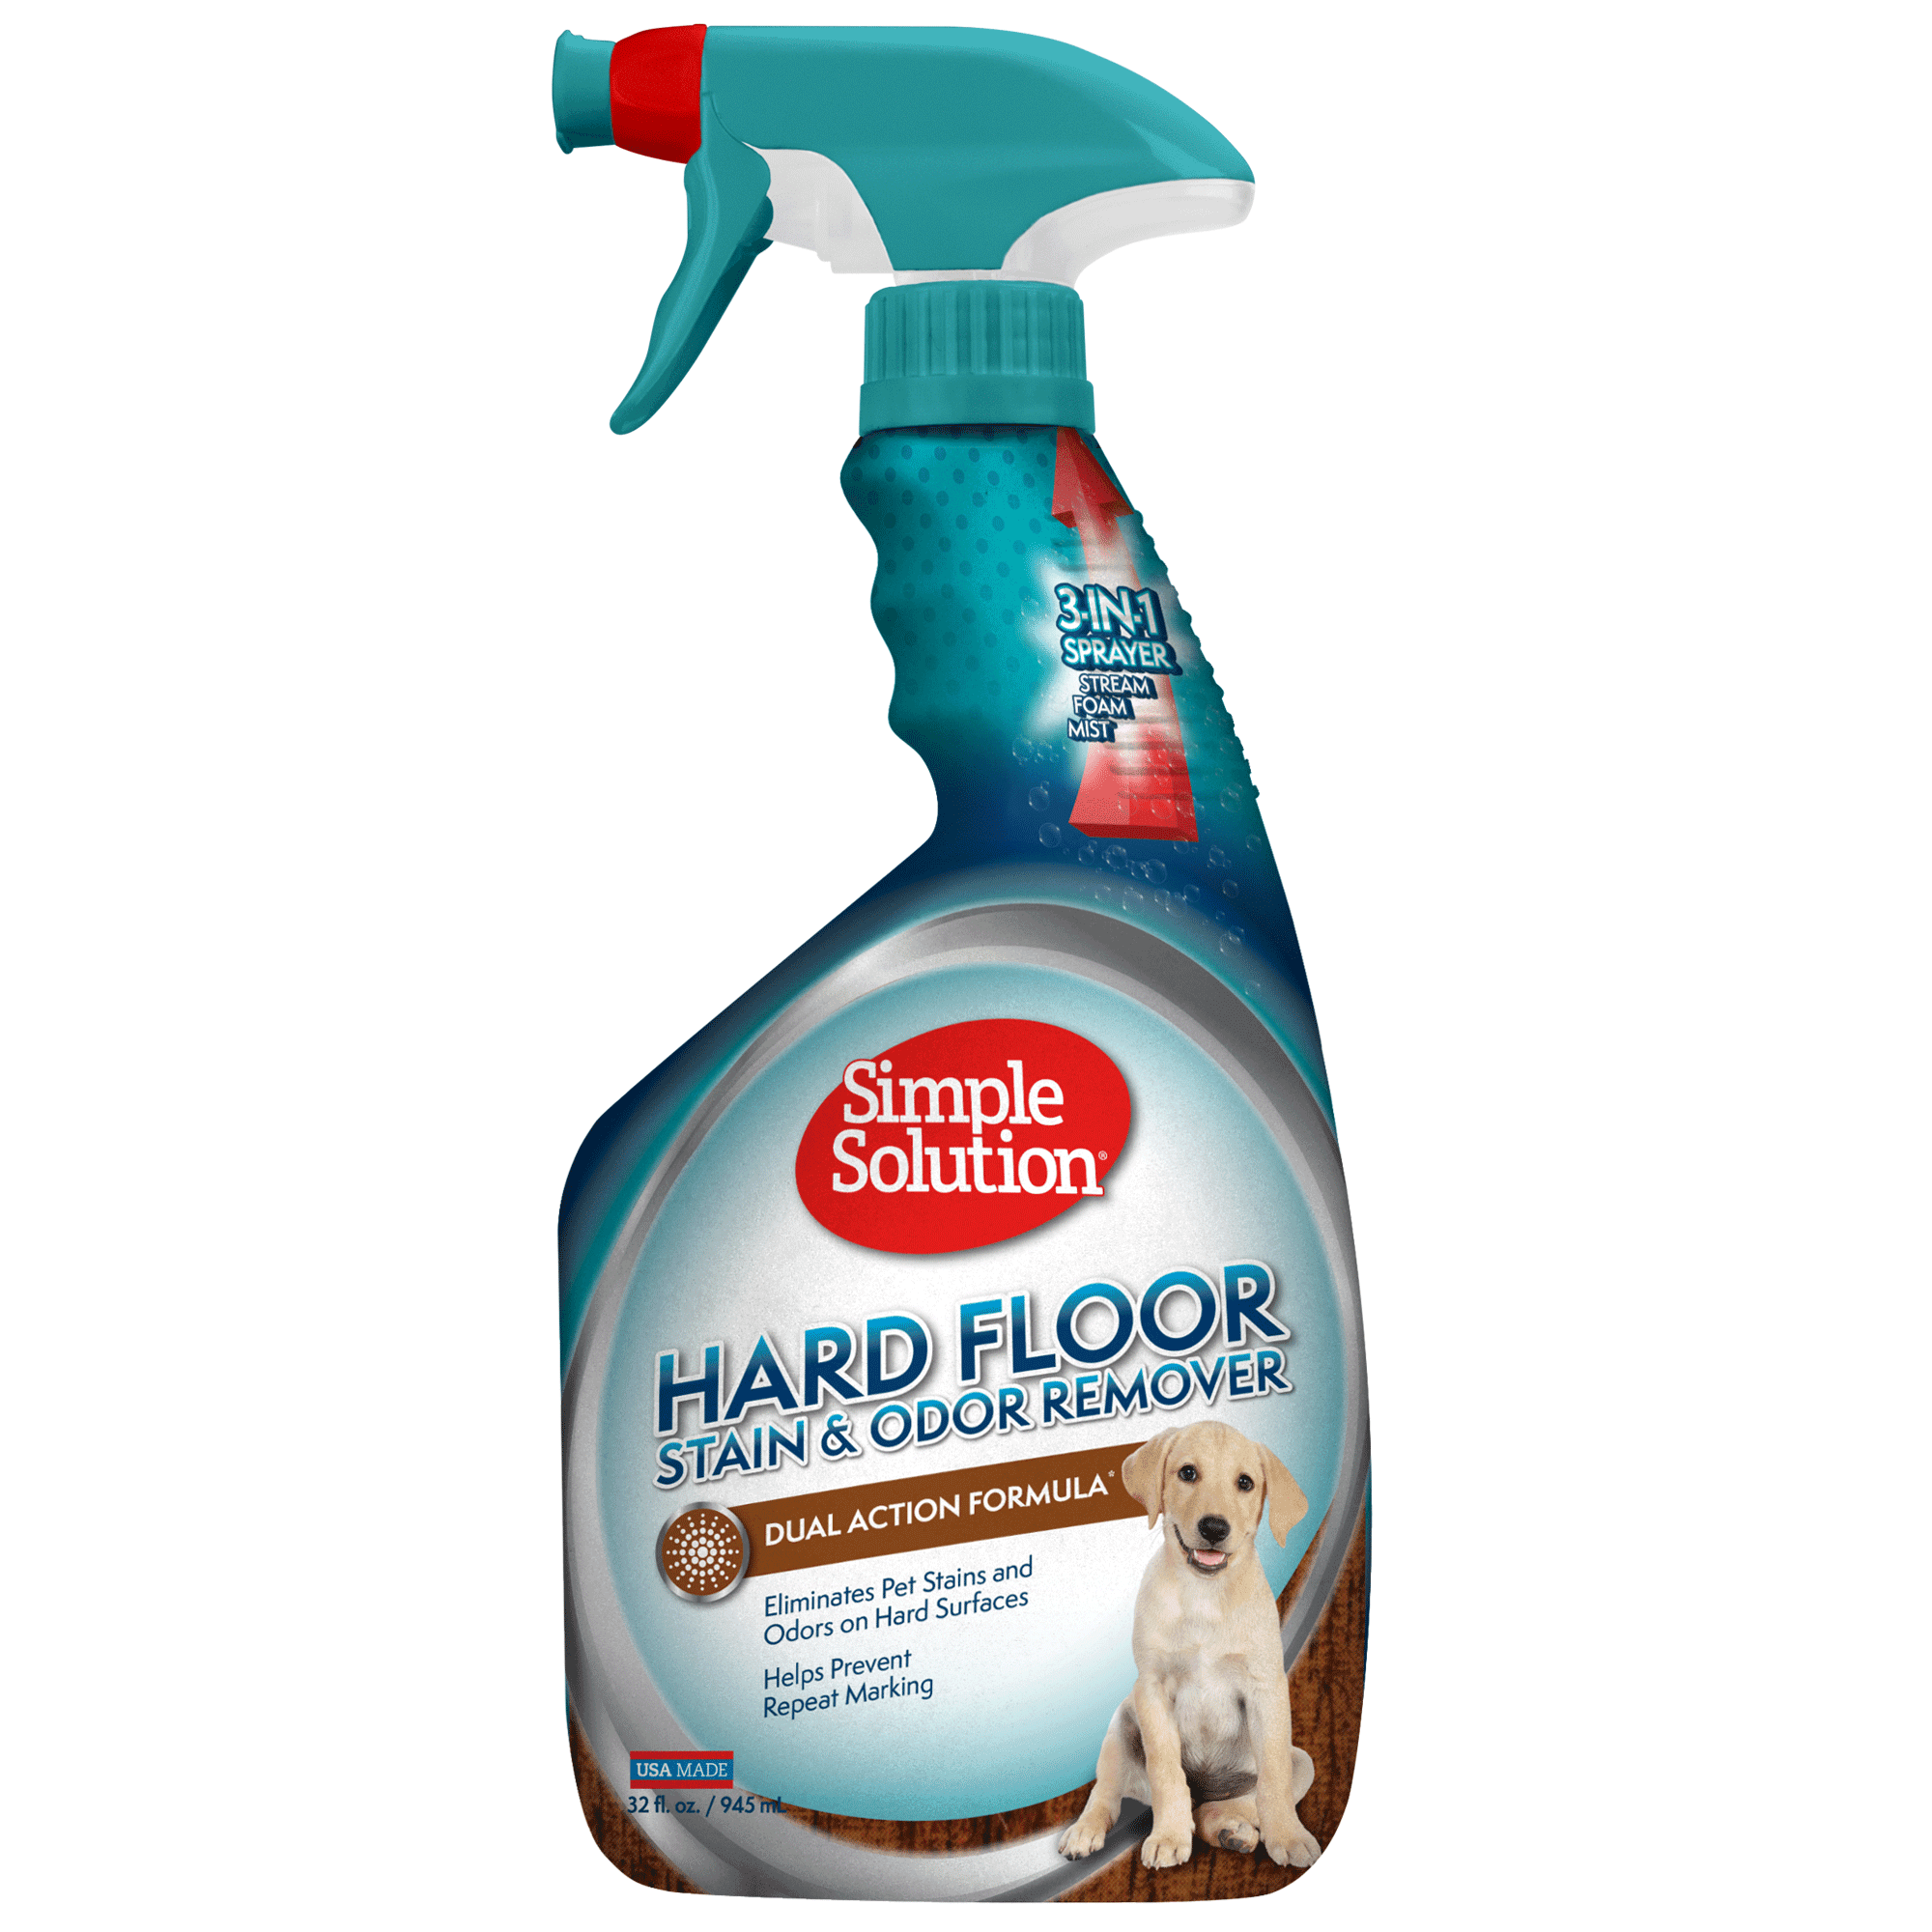 Hard Floor Pet Stain And Odor Remover, Getting Rid Of Pet Odor On Hardwood Floors